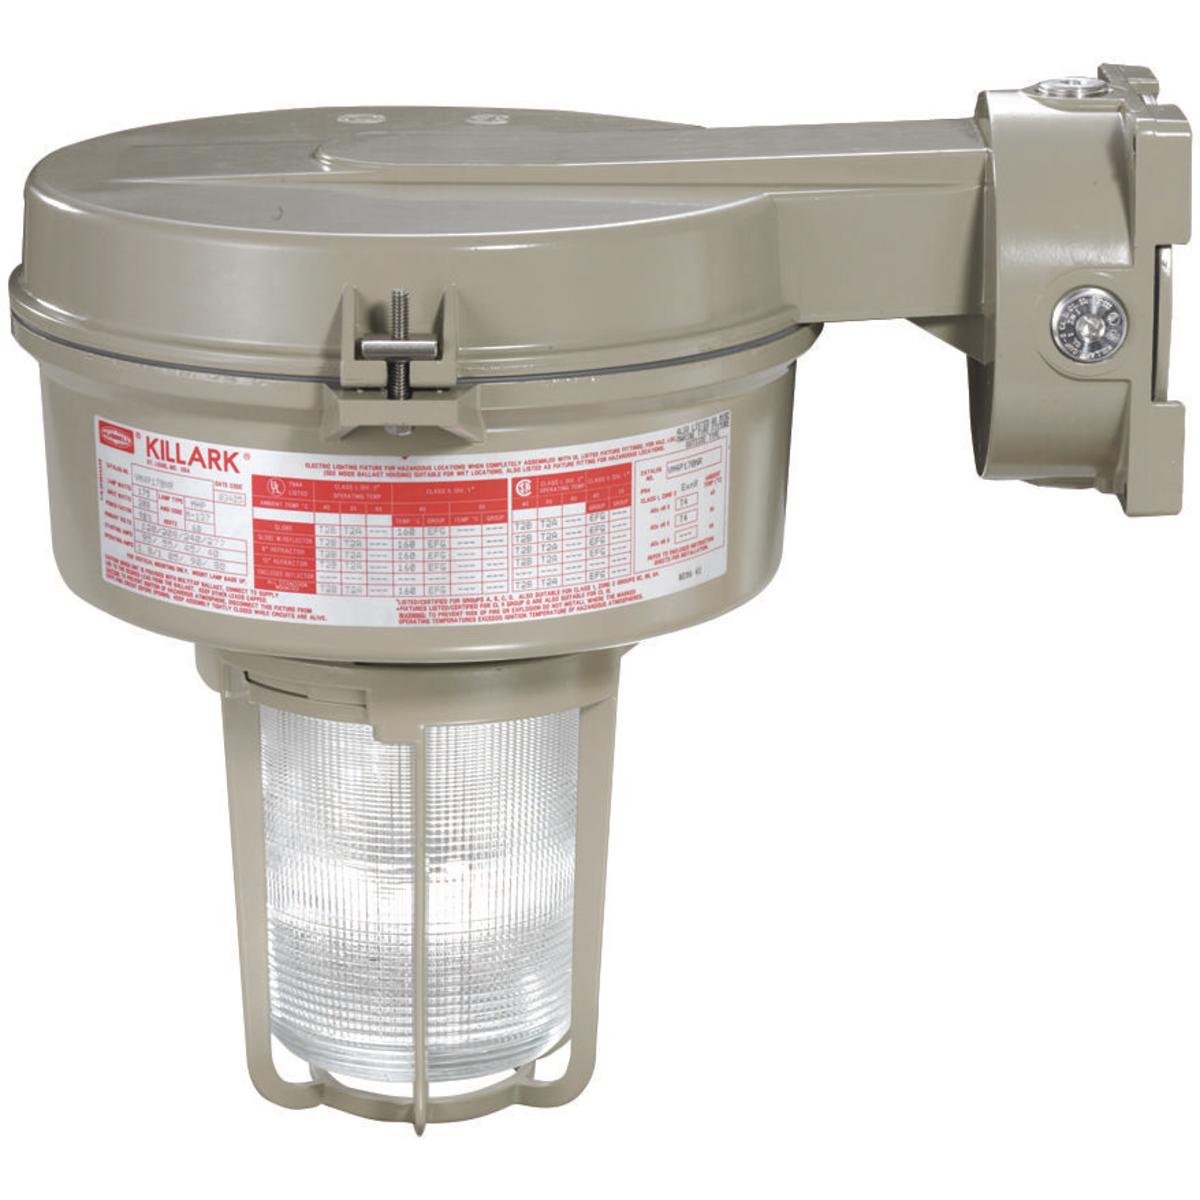 Hubbell VM3P170B2R1G VM3 Series - 175W Metal Halide Quadri-Volt - 3/4" Wall Mount - Type I Glass Refractor and Guard  ; Ballast tank and splice box – corrosion resistant copper-free aluminum alloy with baked powder epoxy/polyester finish, electrostatically applied for complet